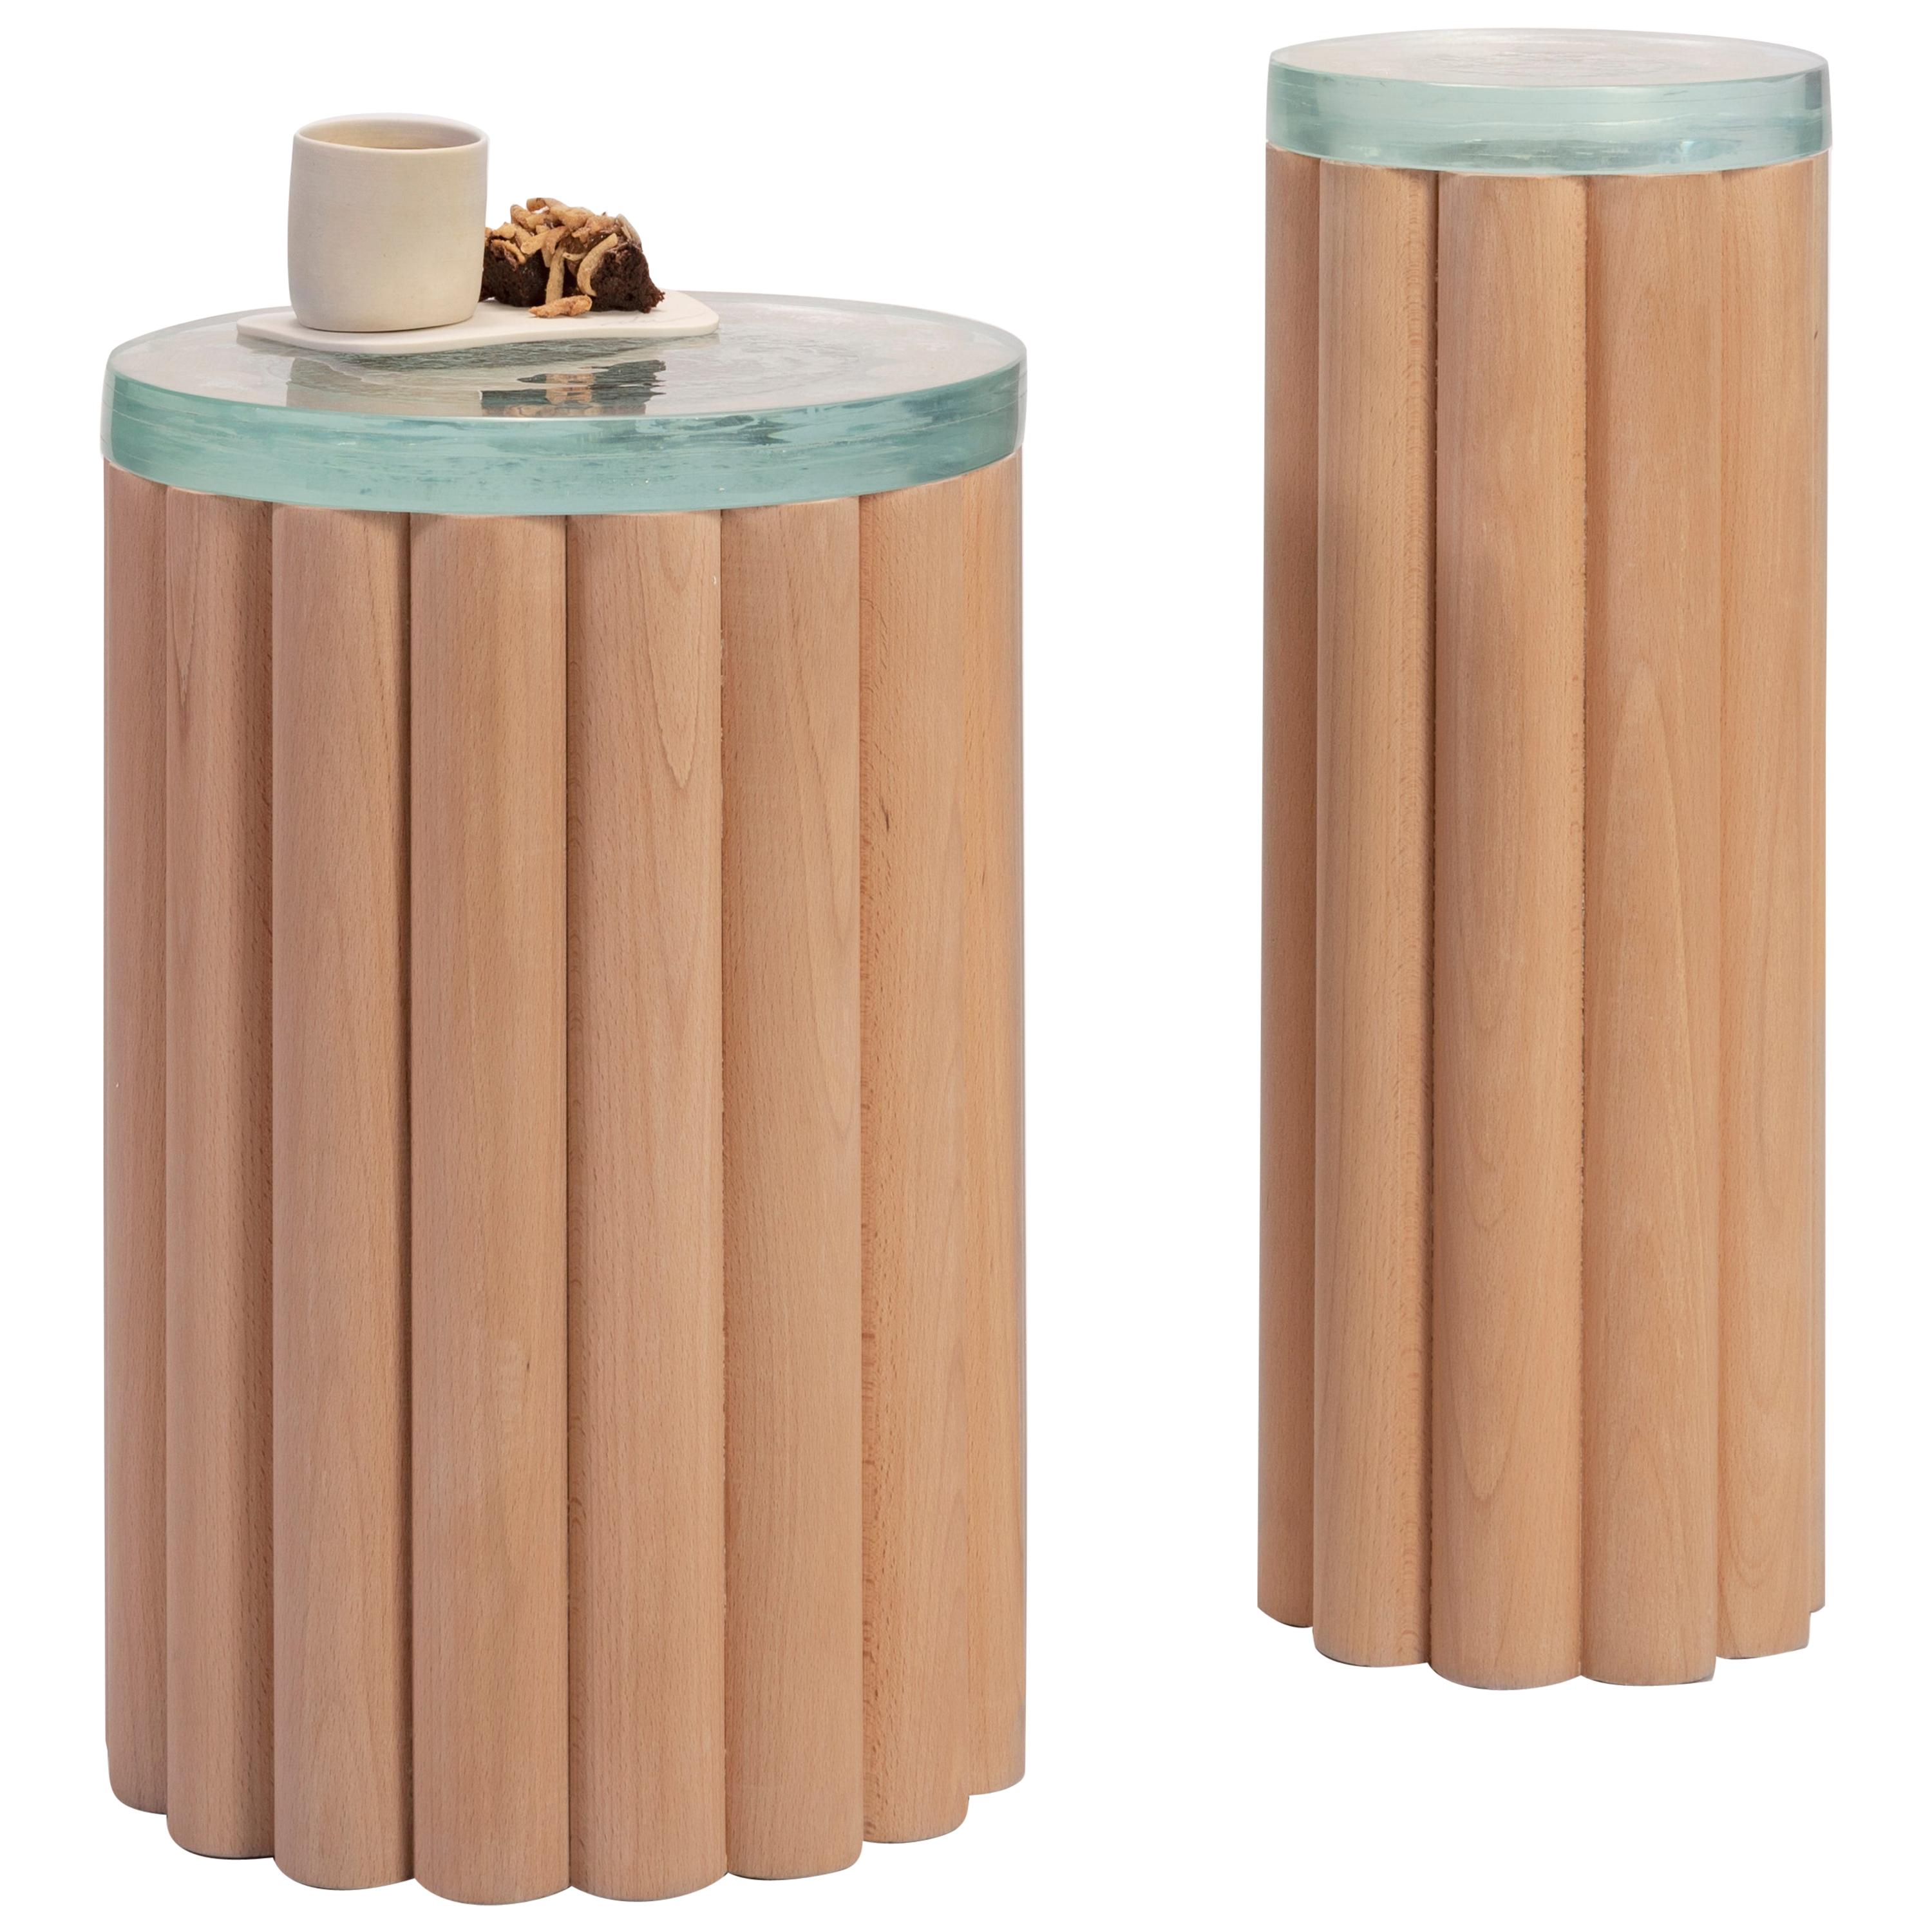 Loto Side Tables, Set of 2, Beech Wood and Fused Glass